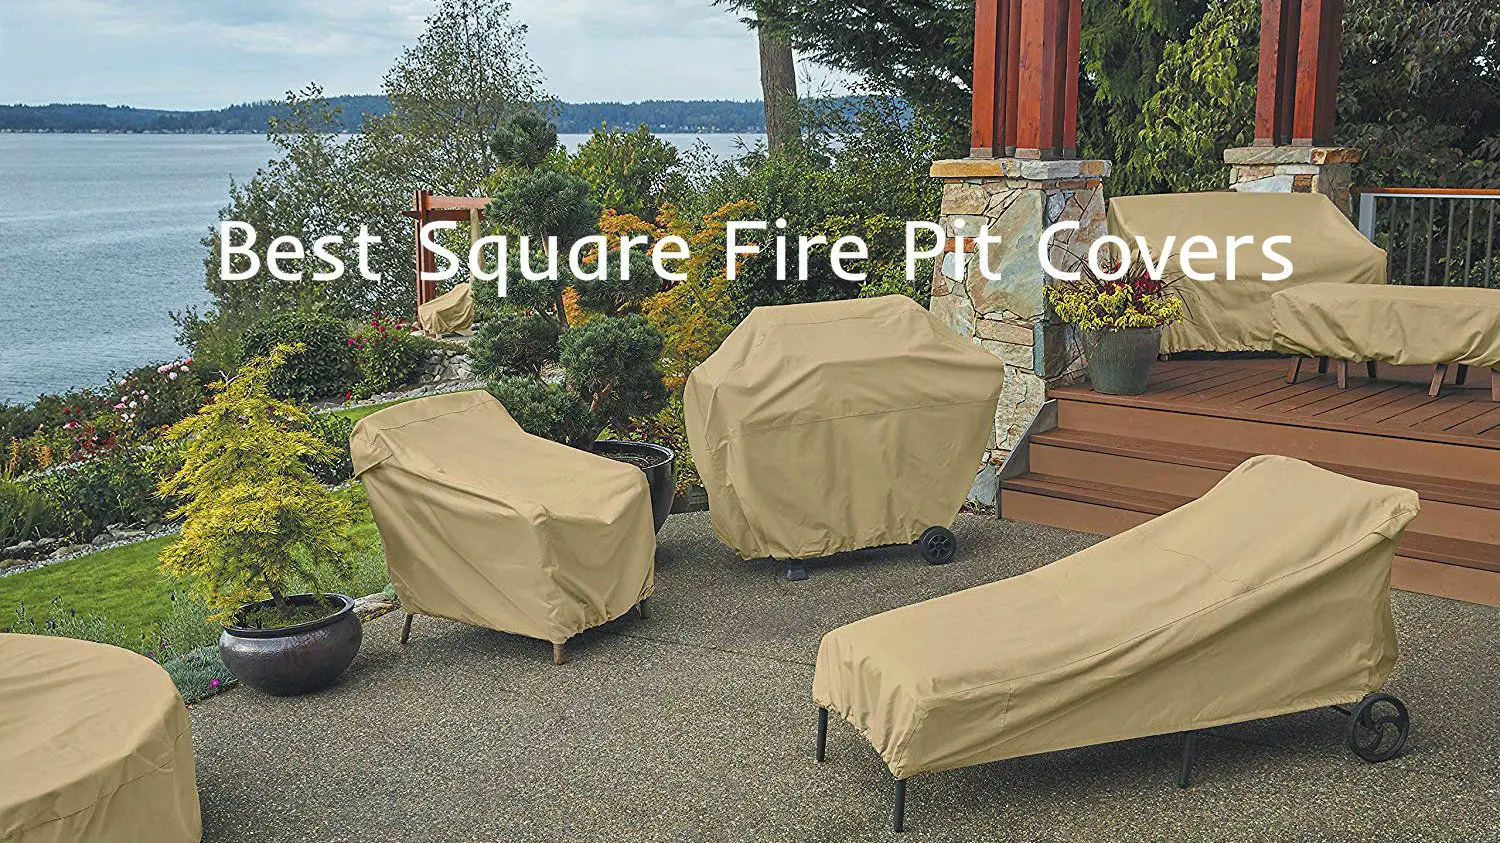 Best Square Fire Pit Covers Heatwhiz Com, 50 Fire Pit Cover